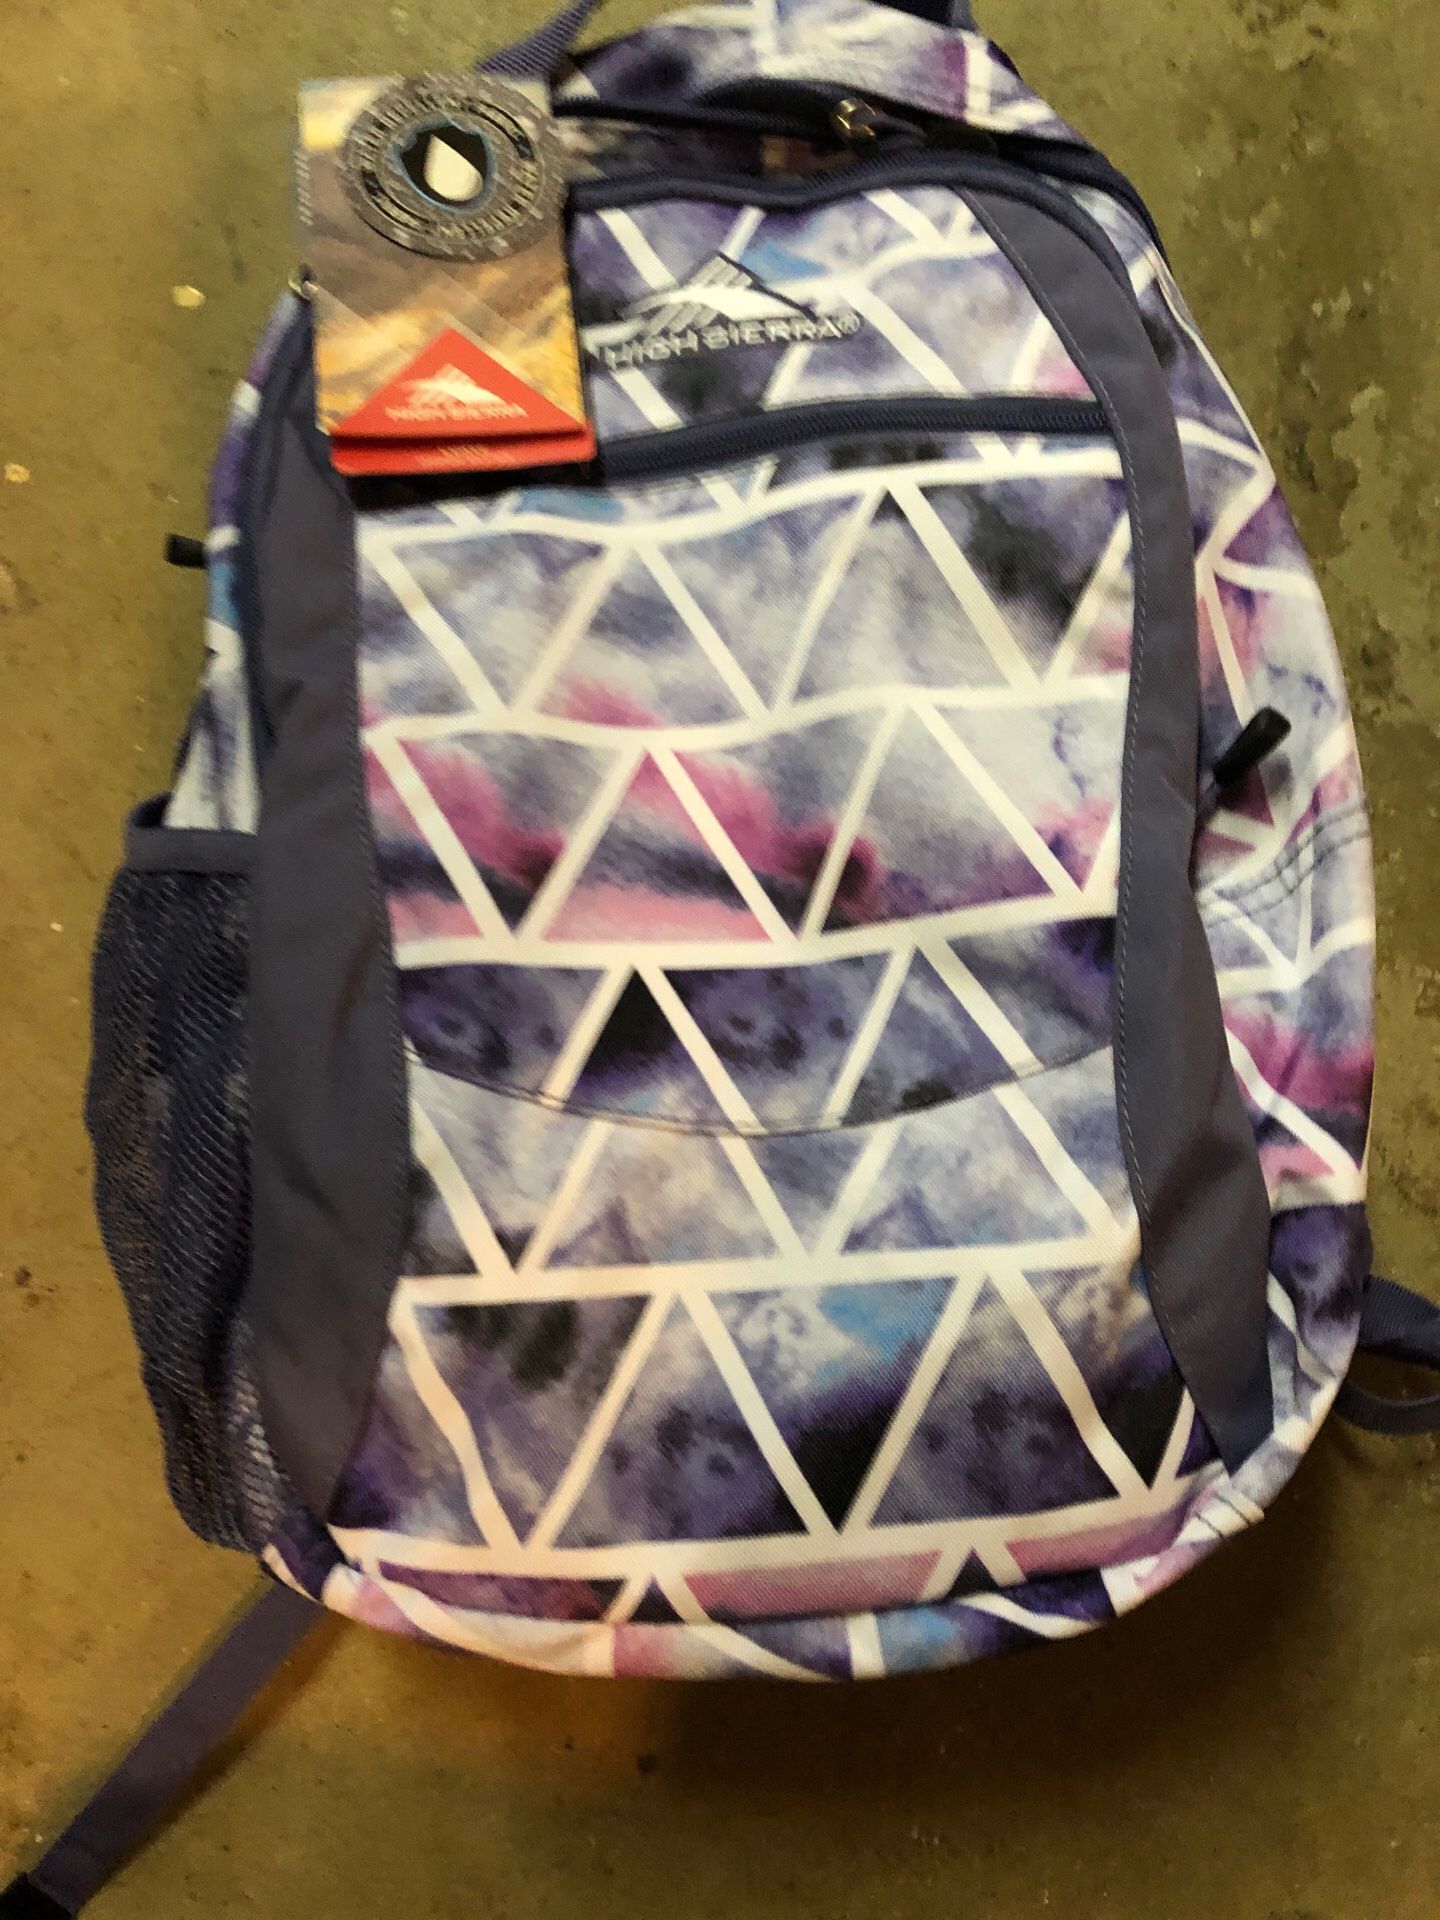 Brand new backpack, never used